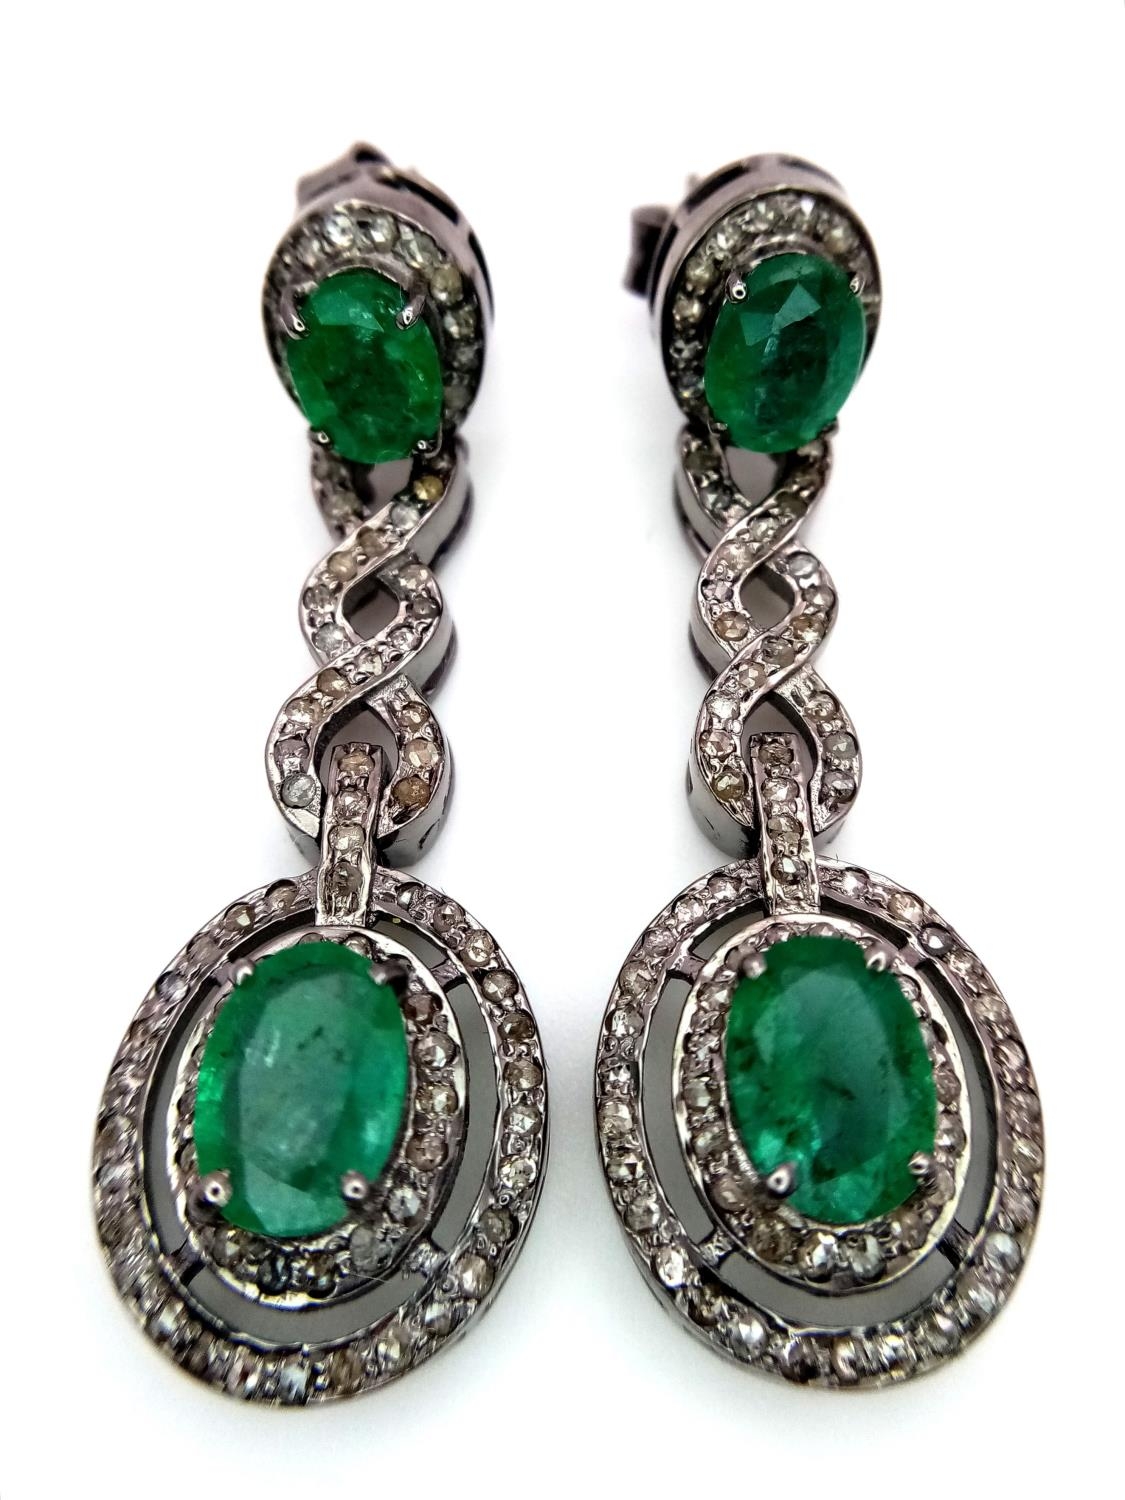 A Pair of Emerald Gemstone Drop Earrings with 3ctw of Emerald and Diamonds - 1.5ctw. Set in 925